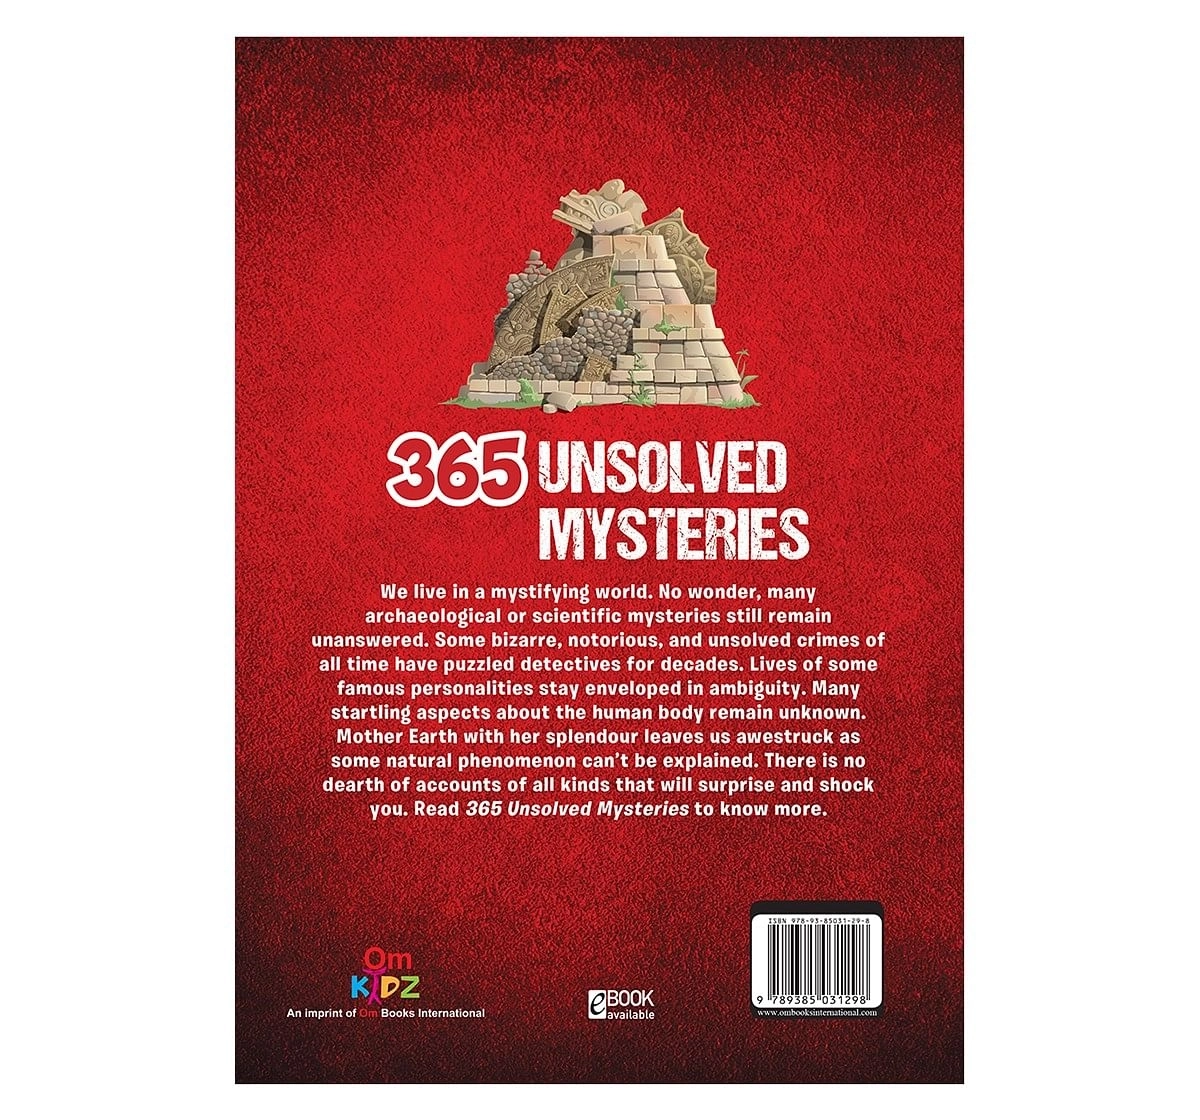 Om Books: 365 Unsolved Mysteries, 236 Pages, Hardcover